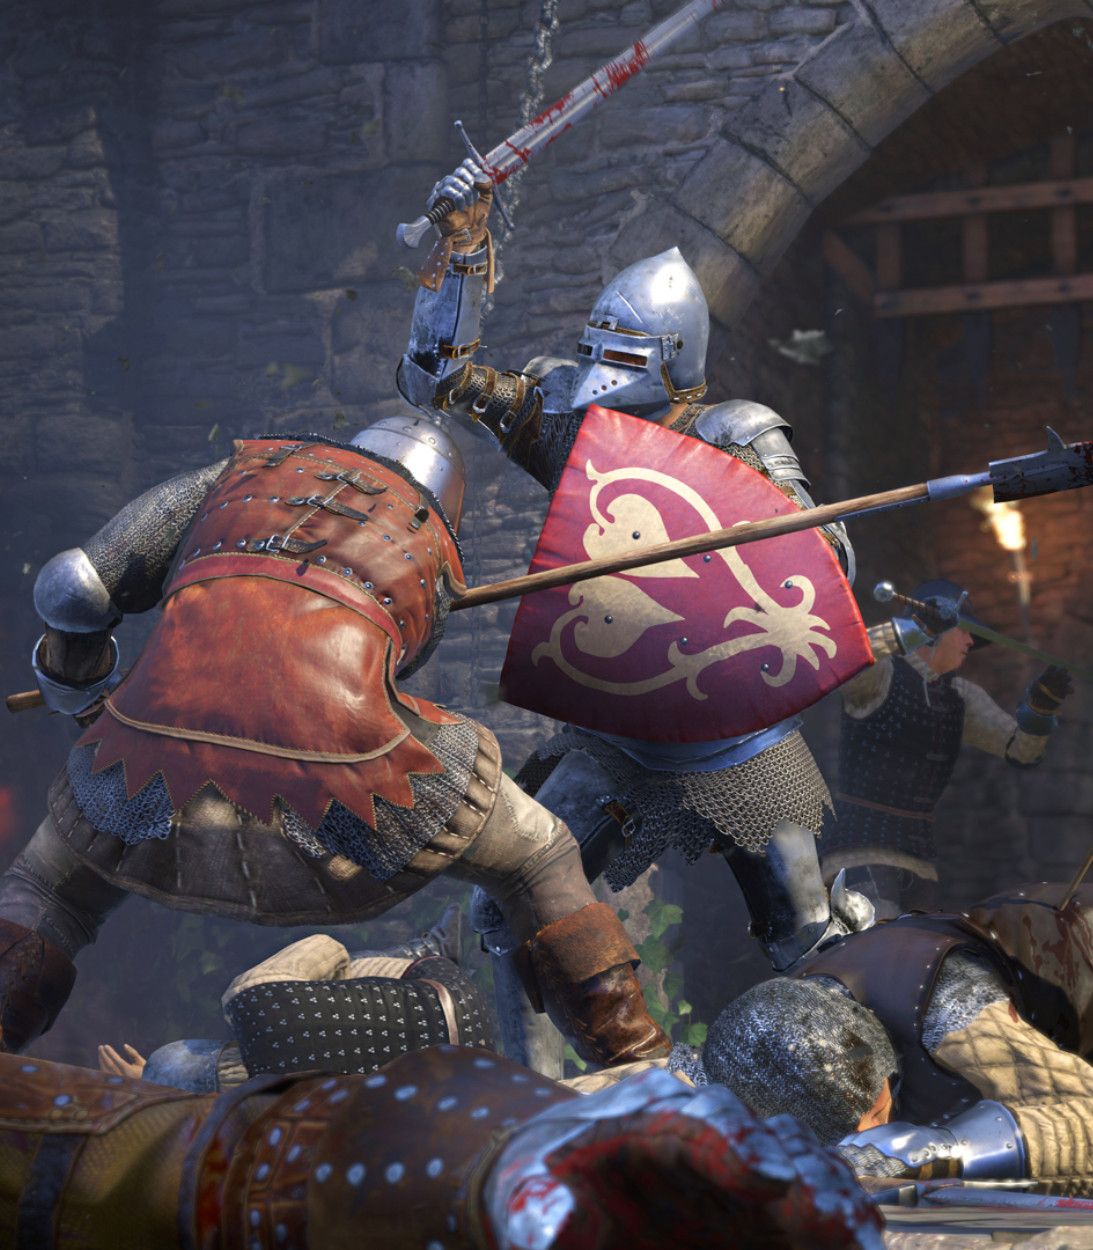 Kingdom Come - Deliverance Free For the Weekend On Steam (TLDR 6)